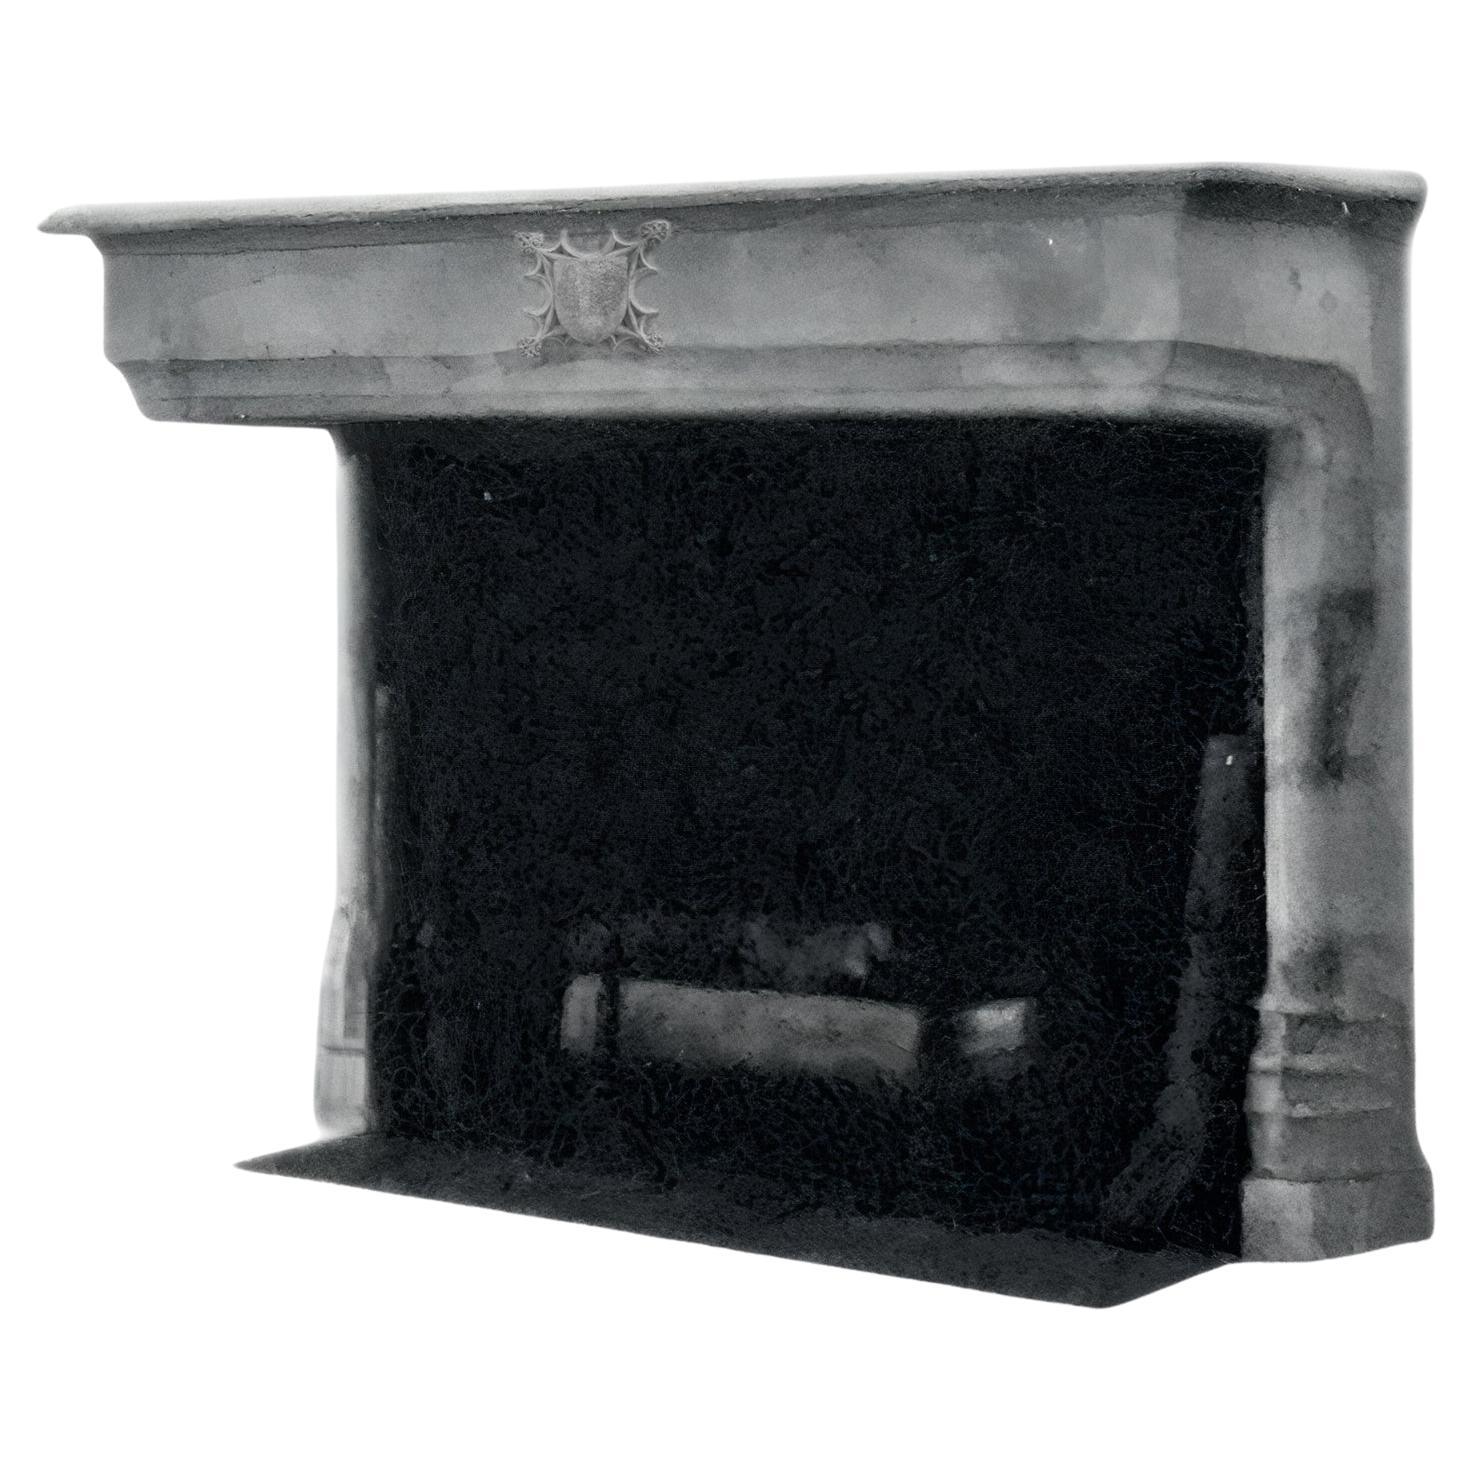 Important stone mantel from the 17th century